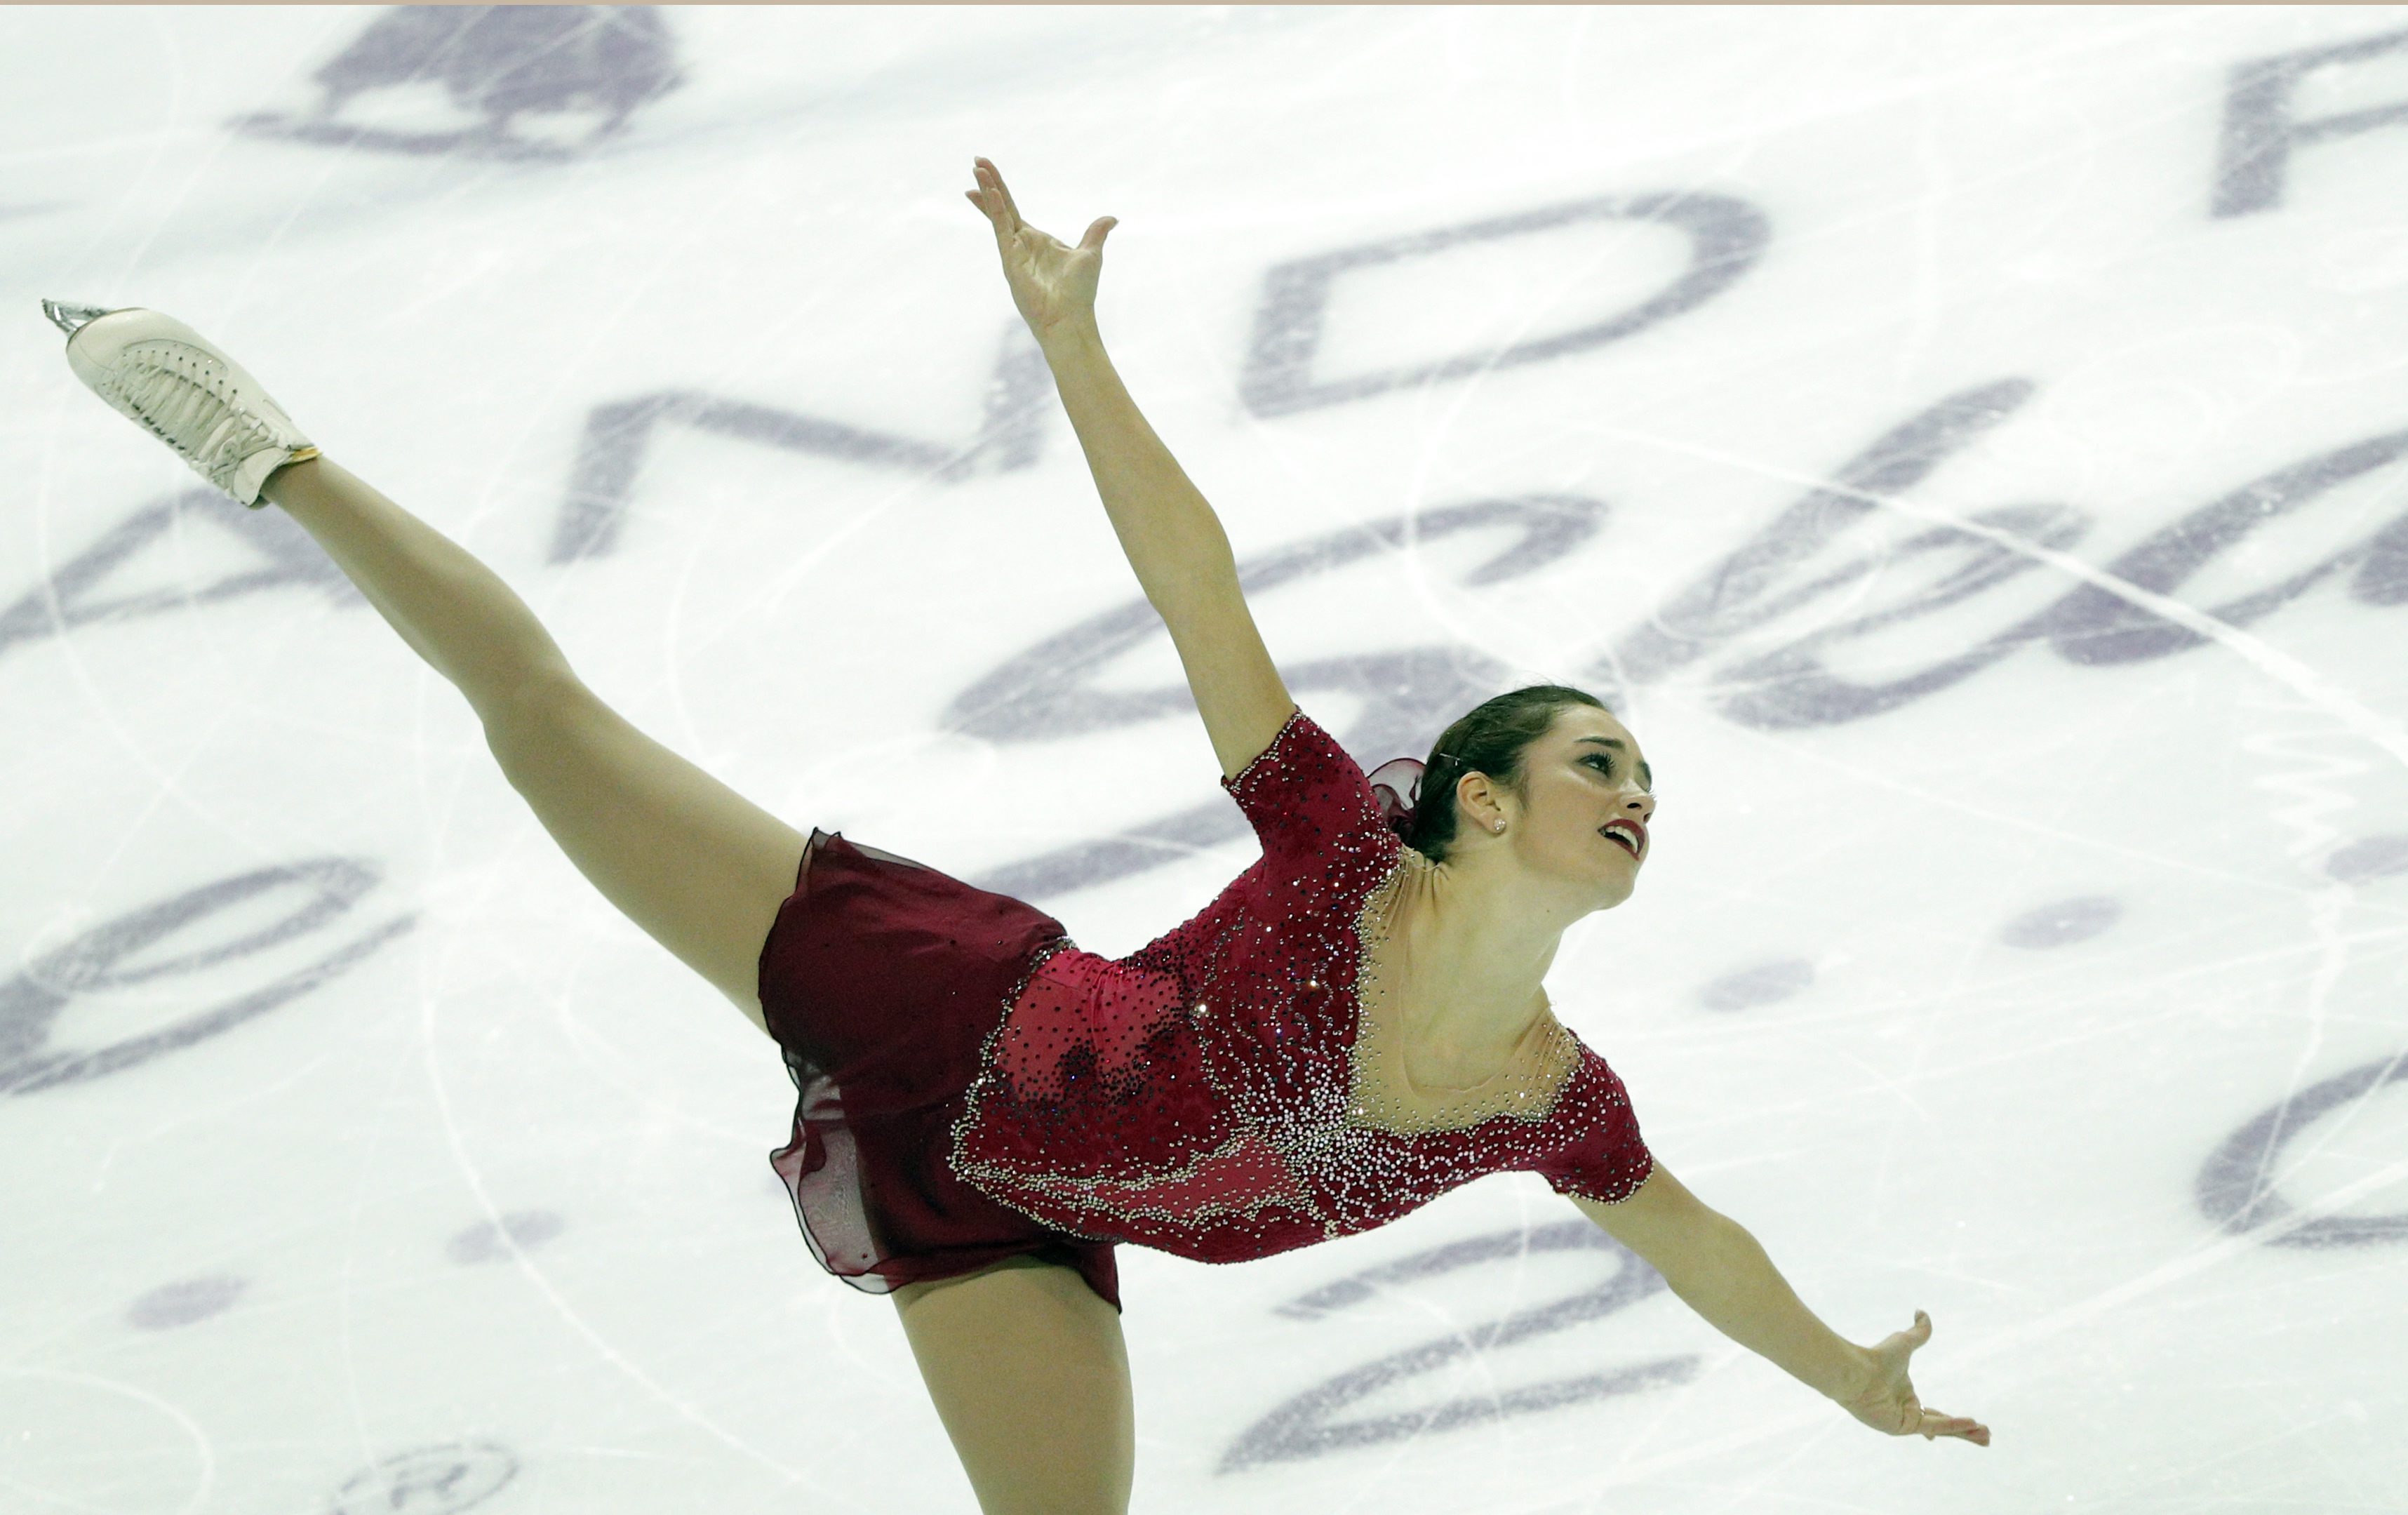 Kaetlyn Osmond of Canada competes in the Ladies Free Skating Program during ISU Grand Prix of Figure Skating Final in Marseille, southern France, Saturday, Dec. 10, 2016. (AP Photo/Christophe Ena)